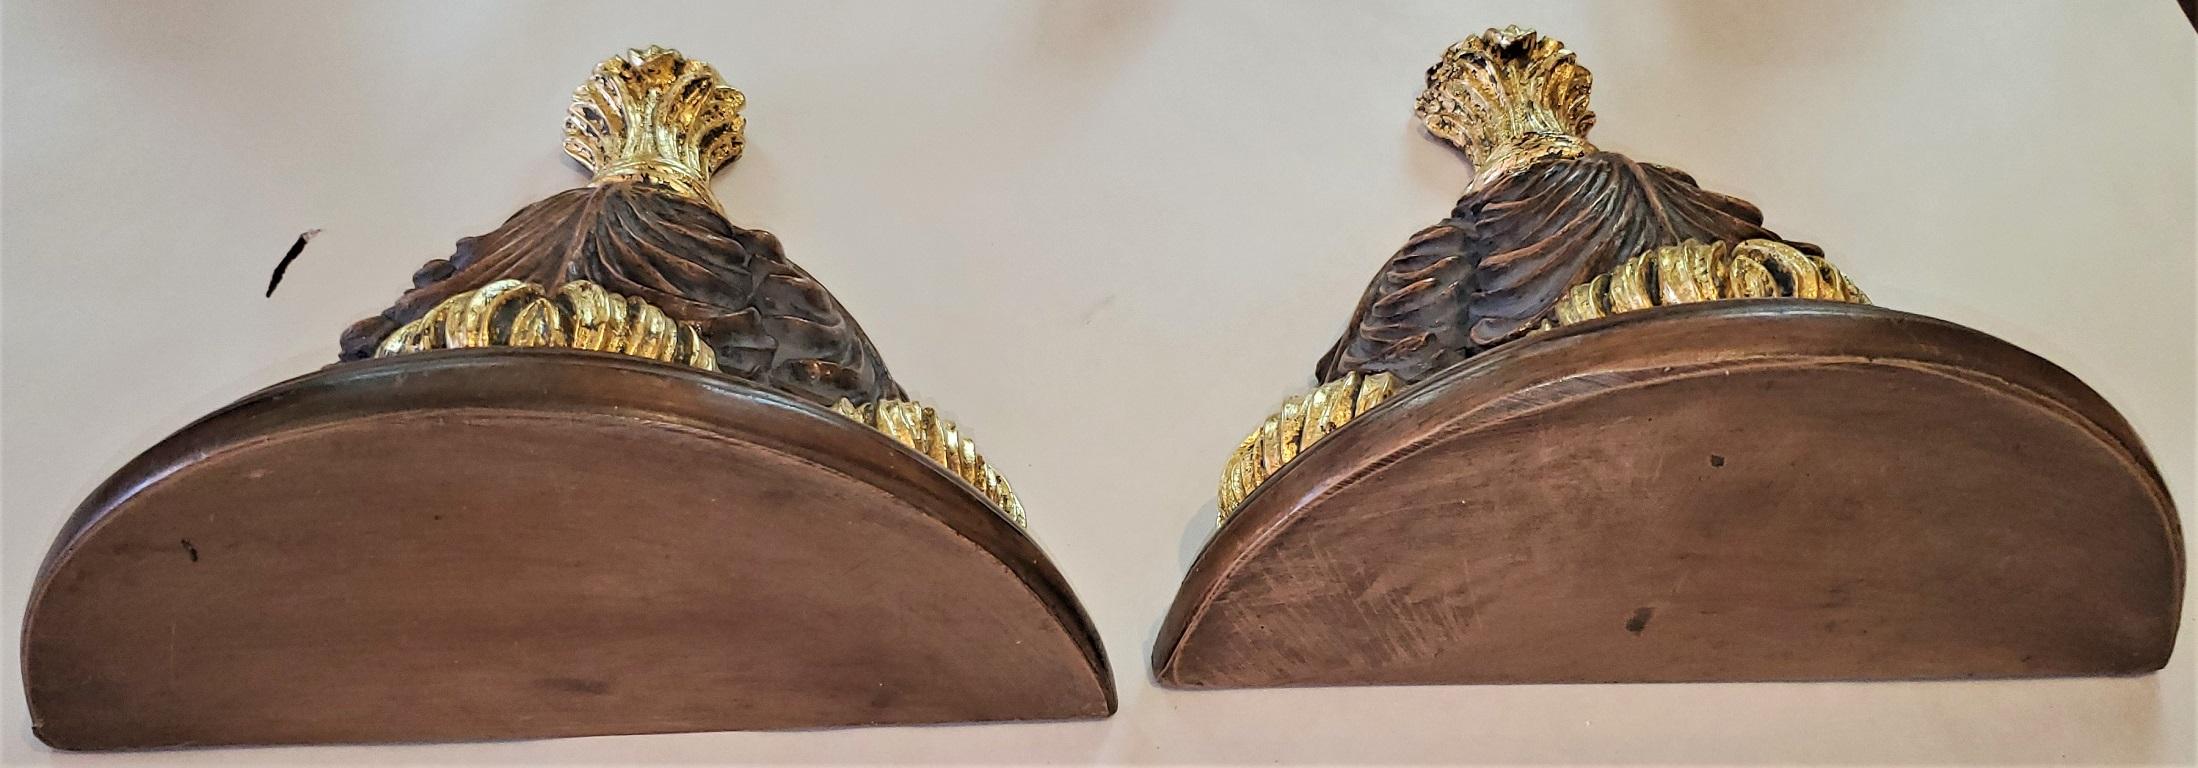 Pair of Decorative Gilt Floral Wall Brackets or Shelves 6